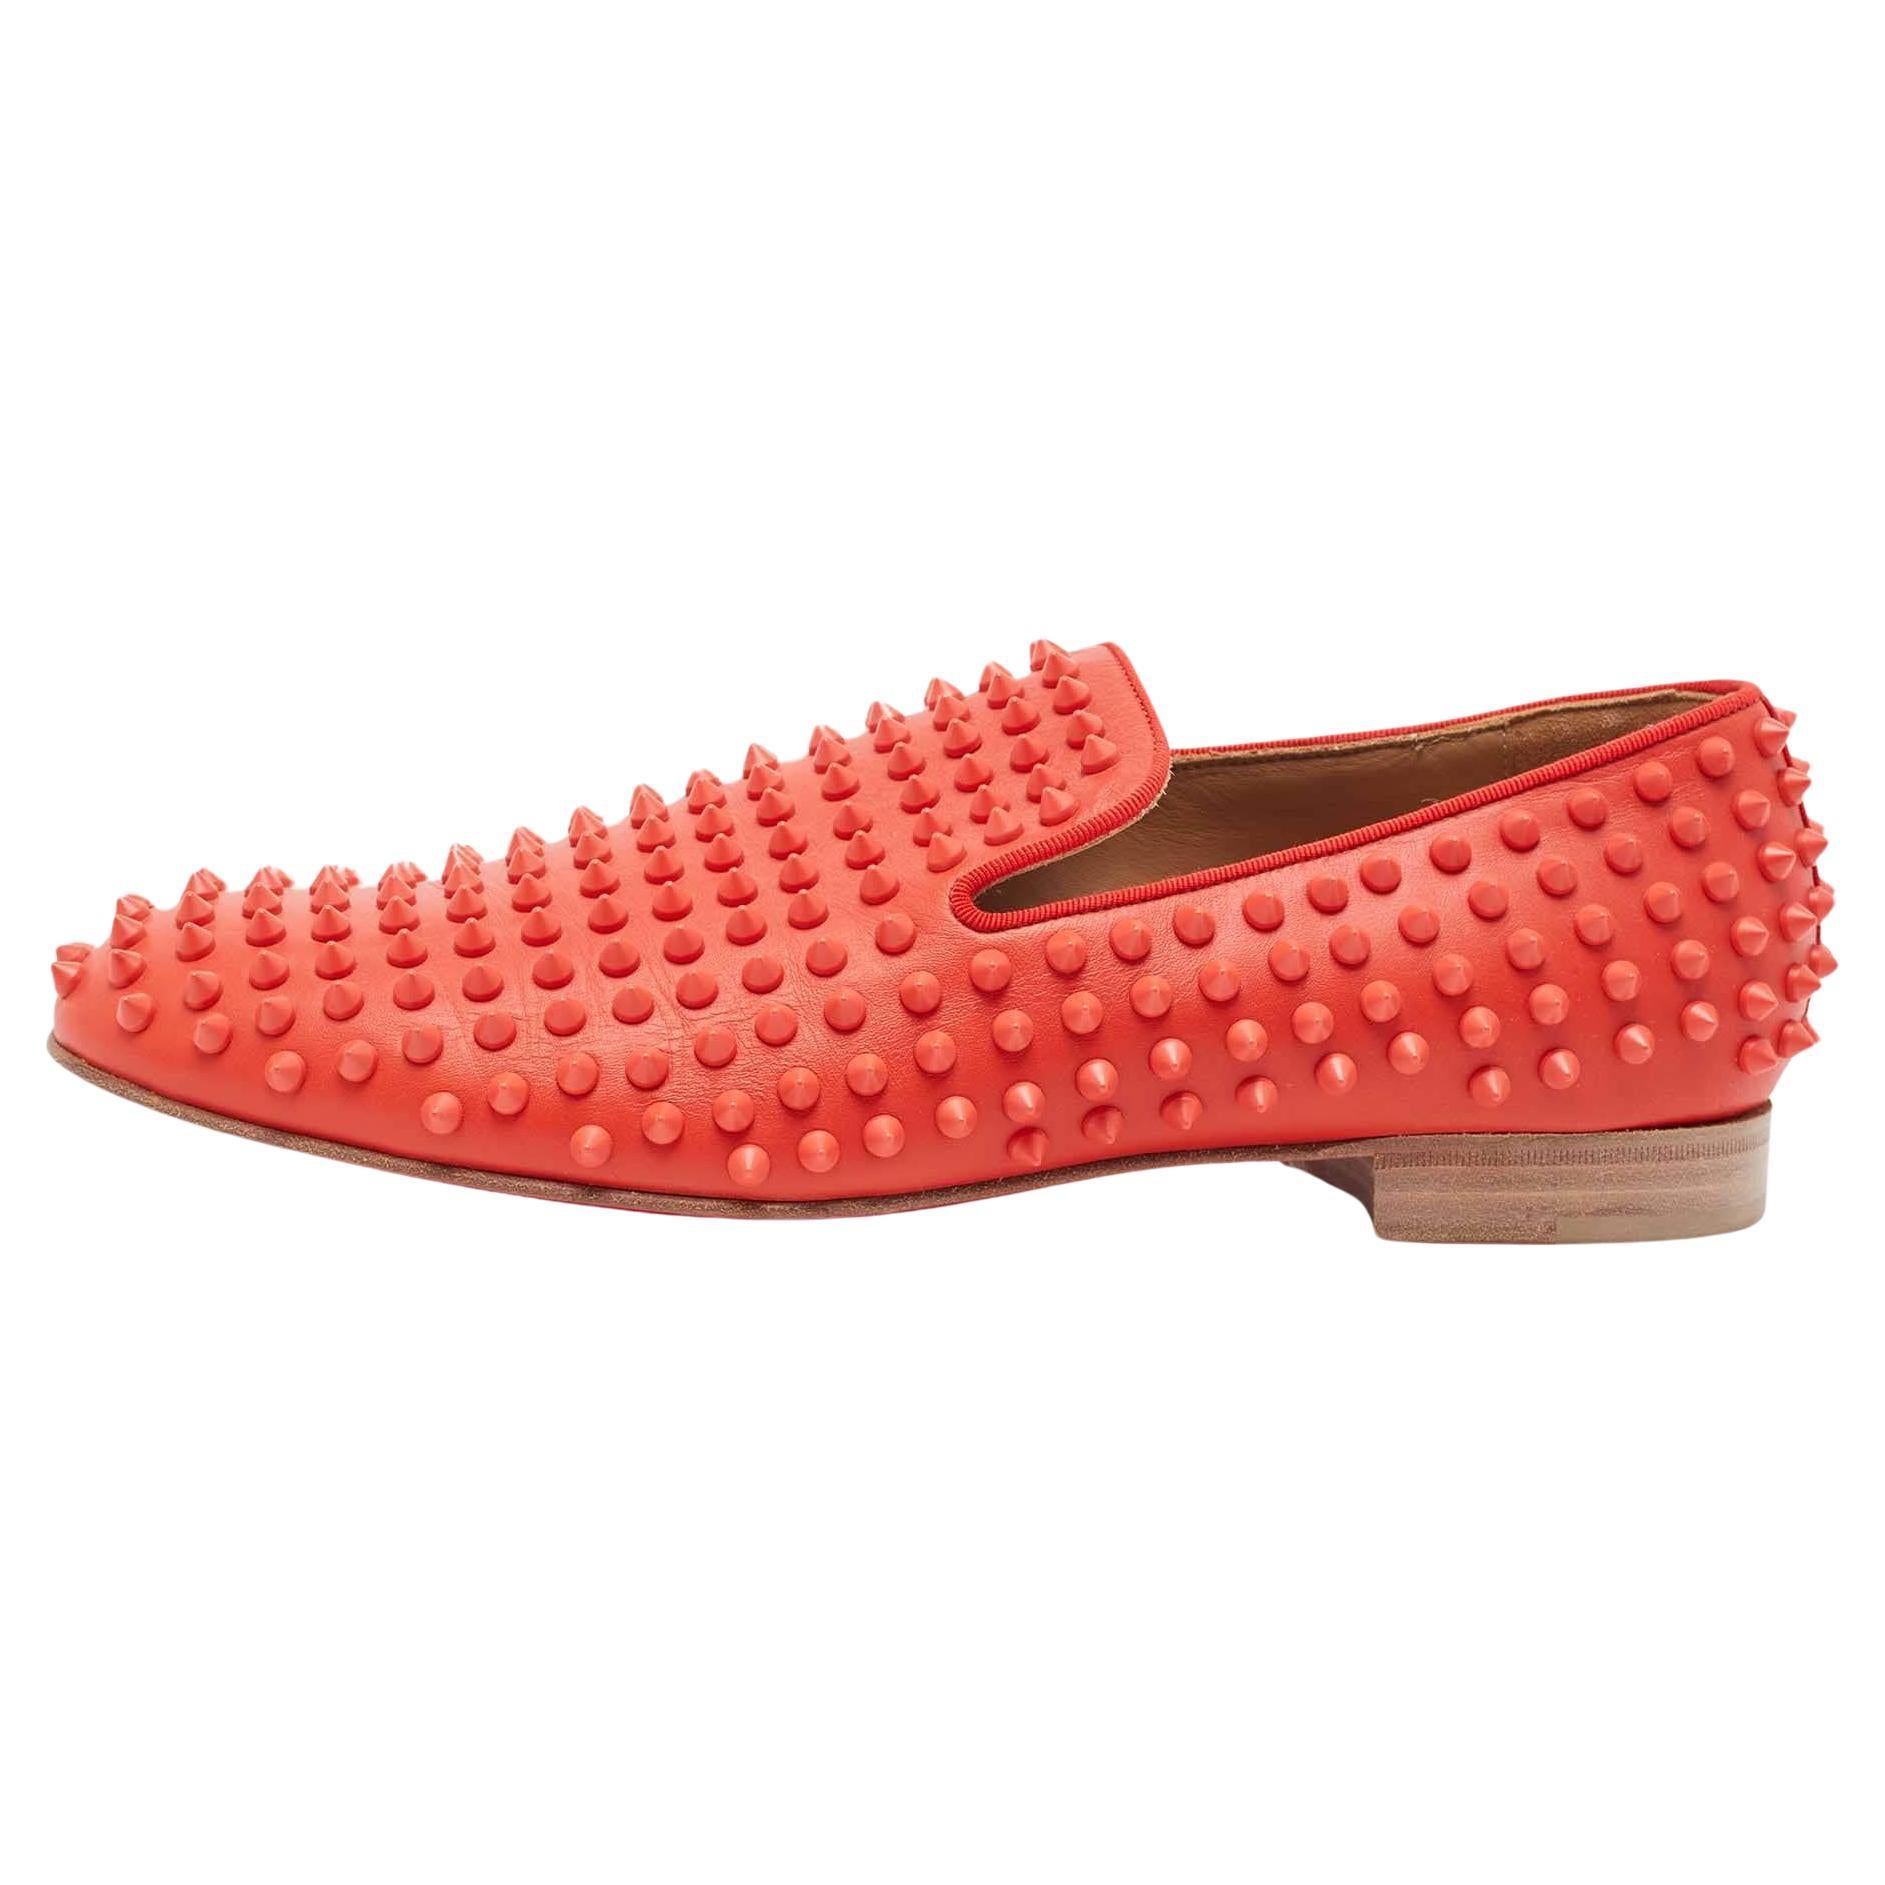 Christian Louboutin Red Leather Rollerboy Spikes Smoking Slippers Size 42